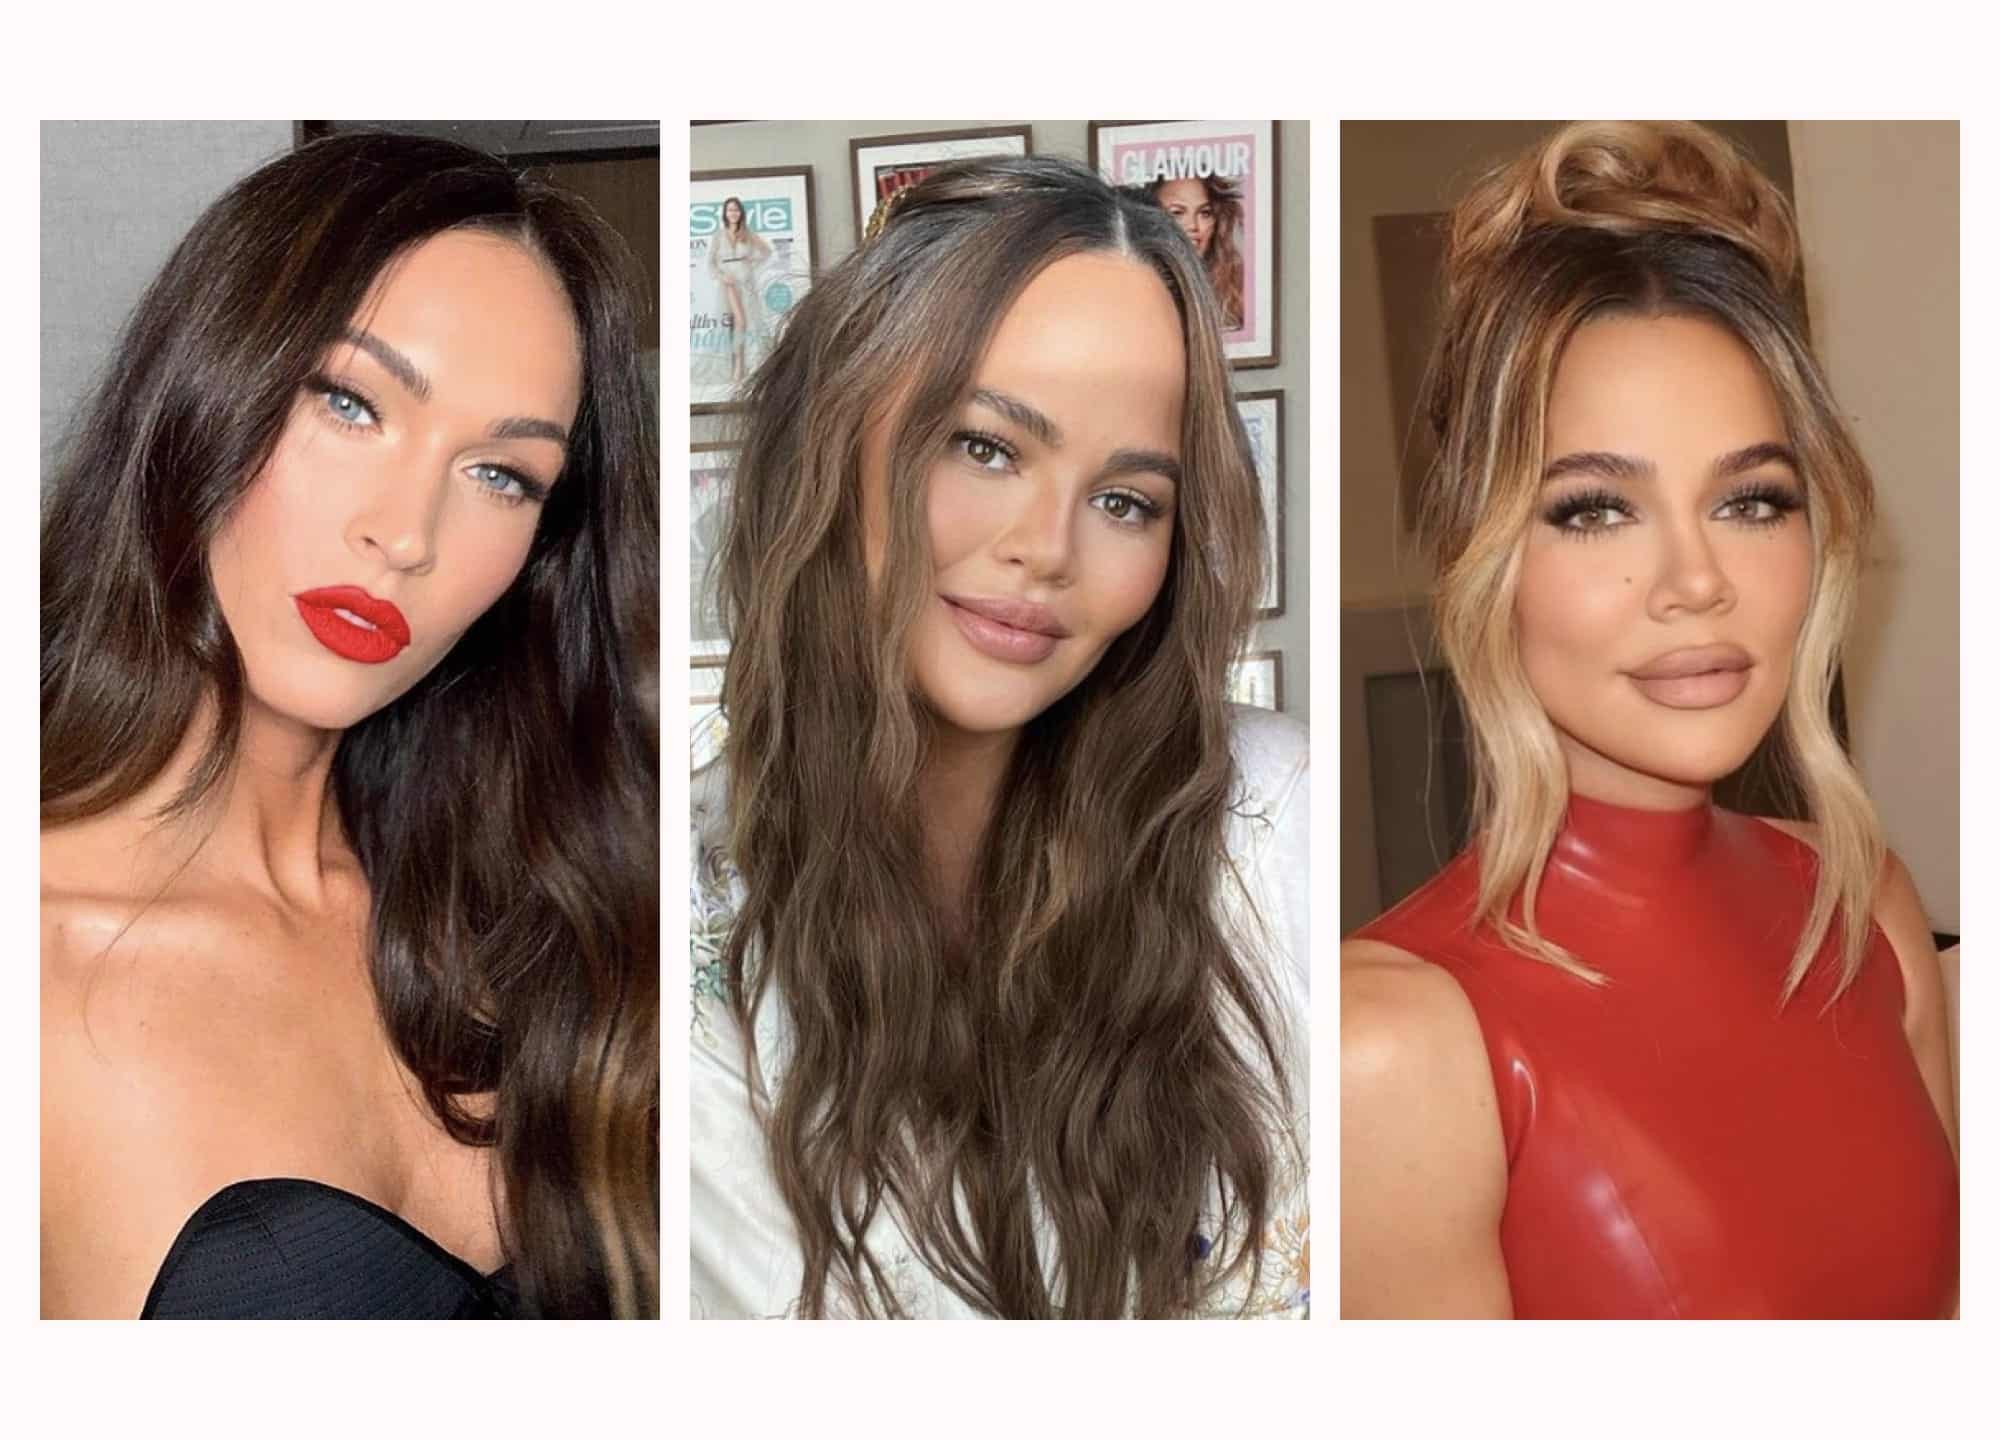 The 5 Most Popular Plastic Surgeries In The U.S. In 2018 - Best